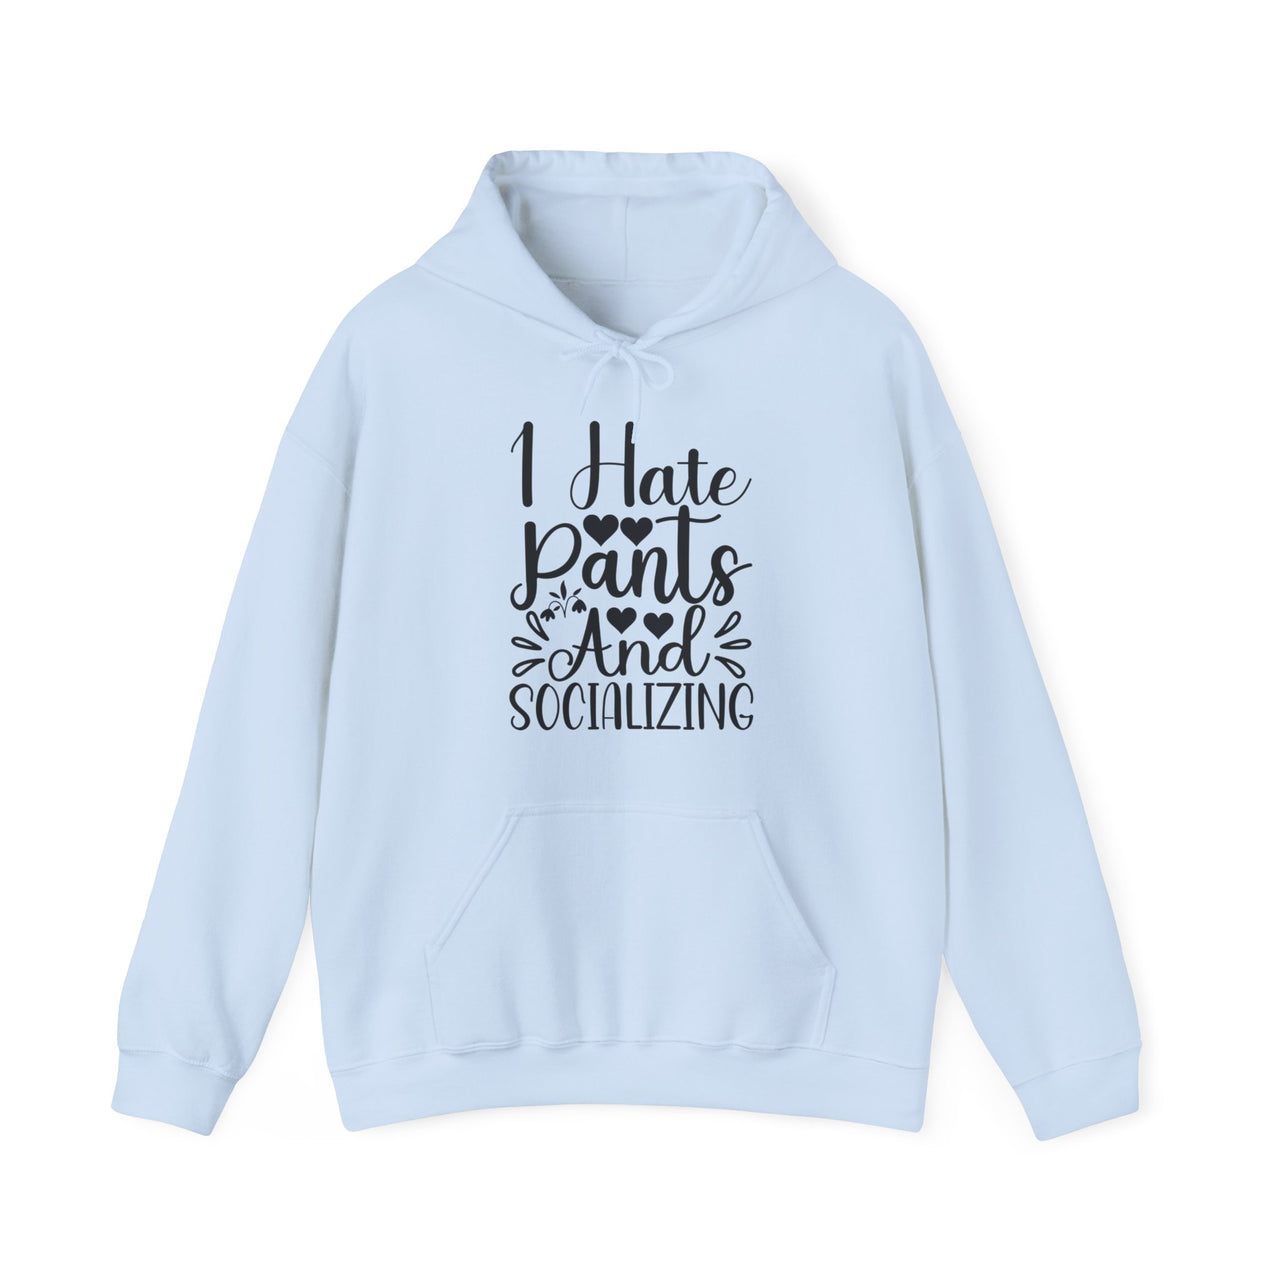 I hate pants and socializing Cozy Hoodie